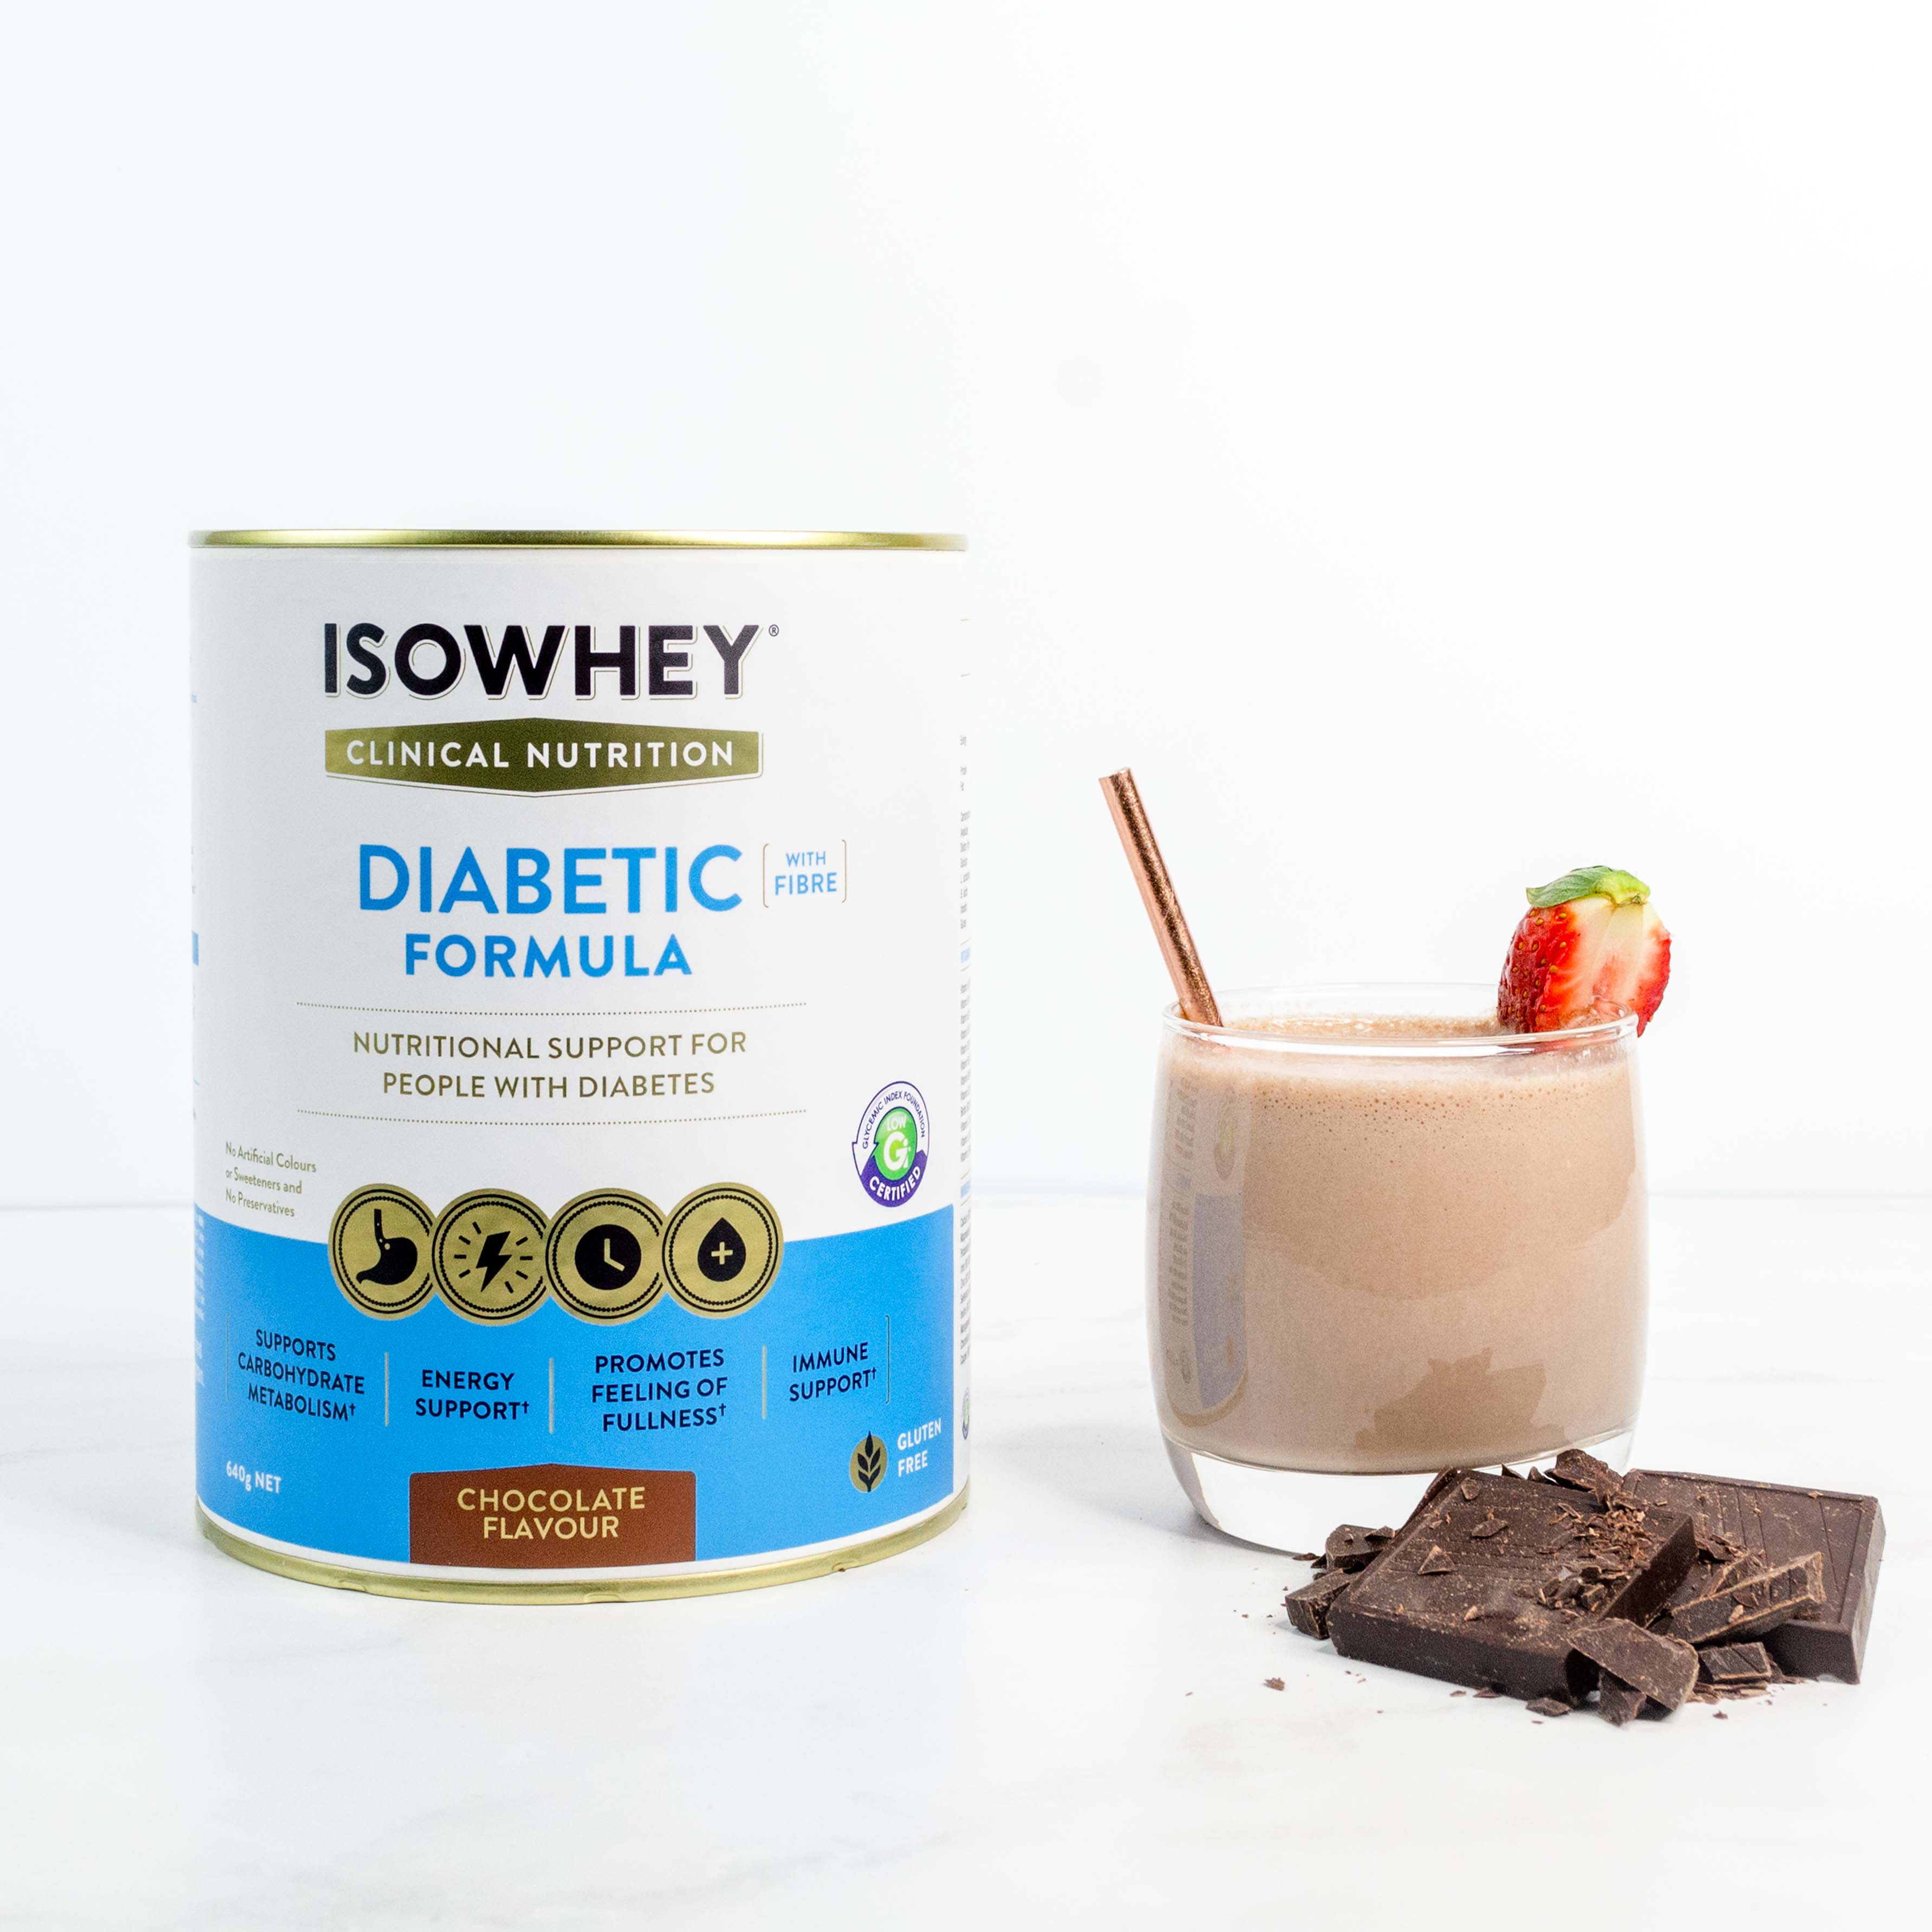 IsoWhey Clinical Nutrition Diabetic Formula Chocolate 640g back of can with nutritional information